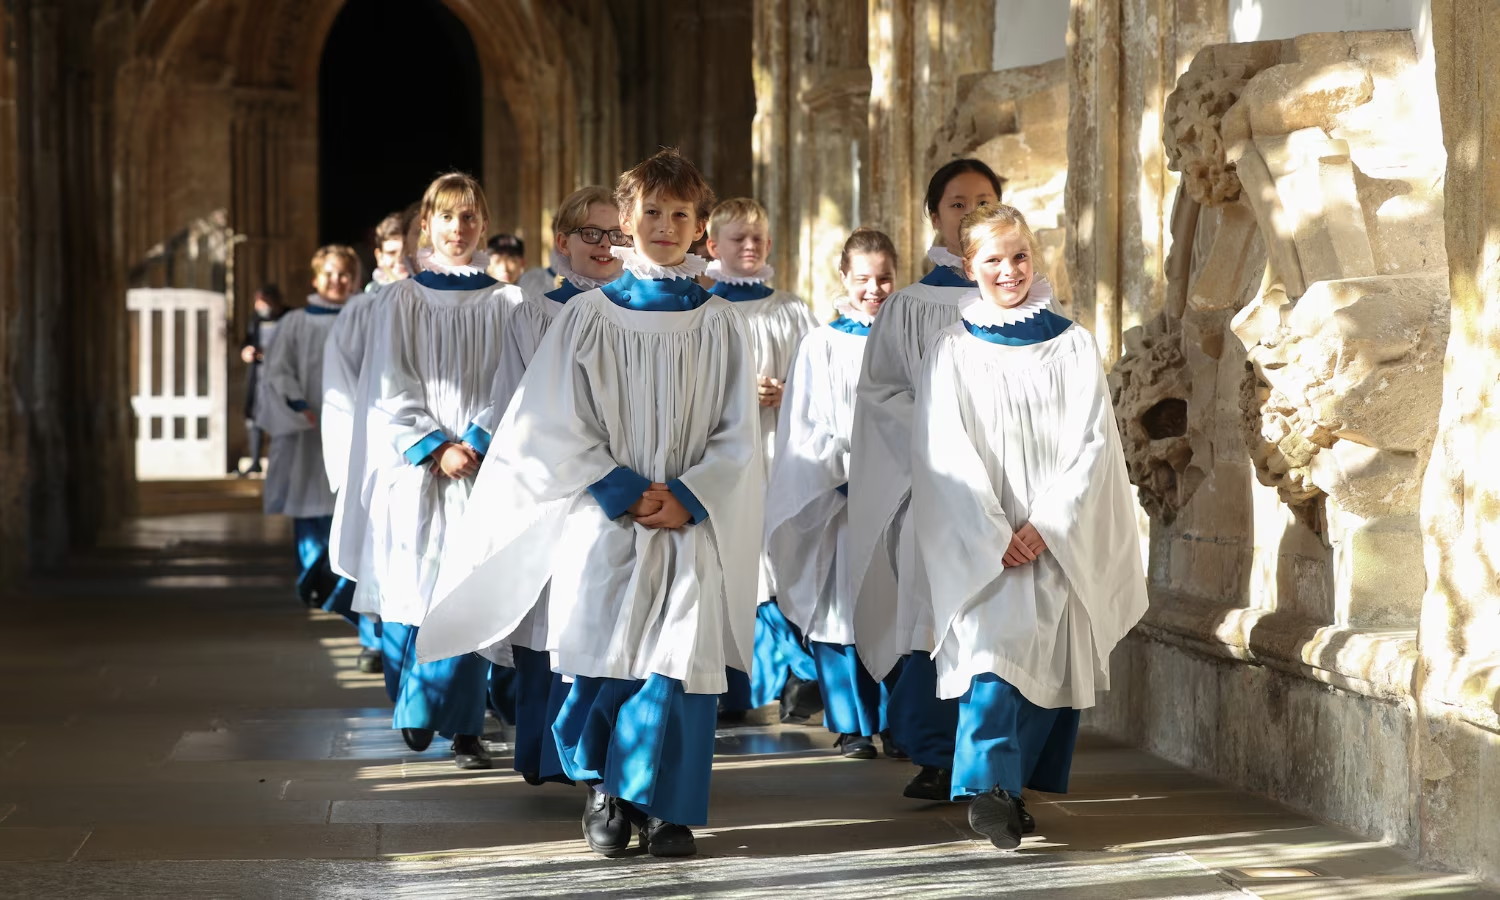 Photo of several boys wearing blue-collared white surplices over blue trousers, striding along an aisle past a carved stone wall